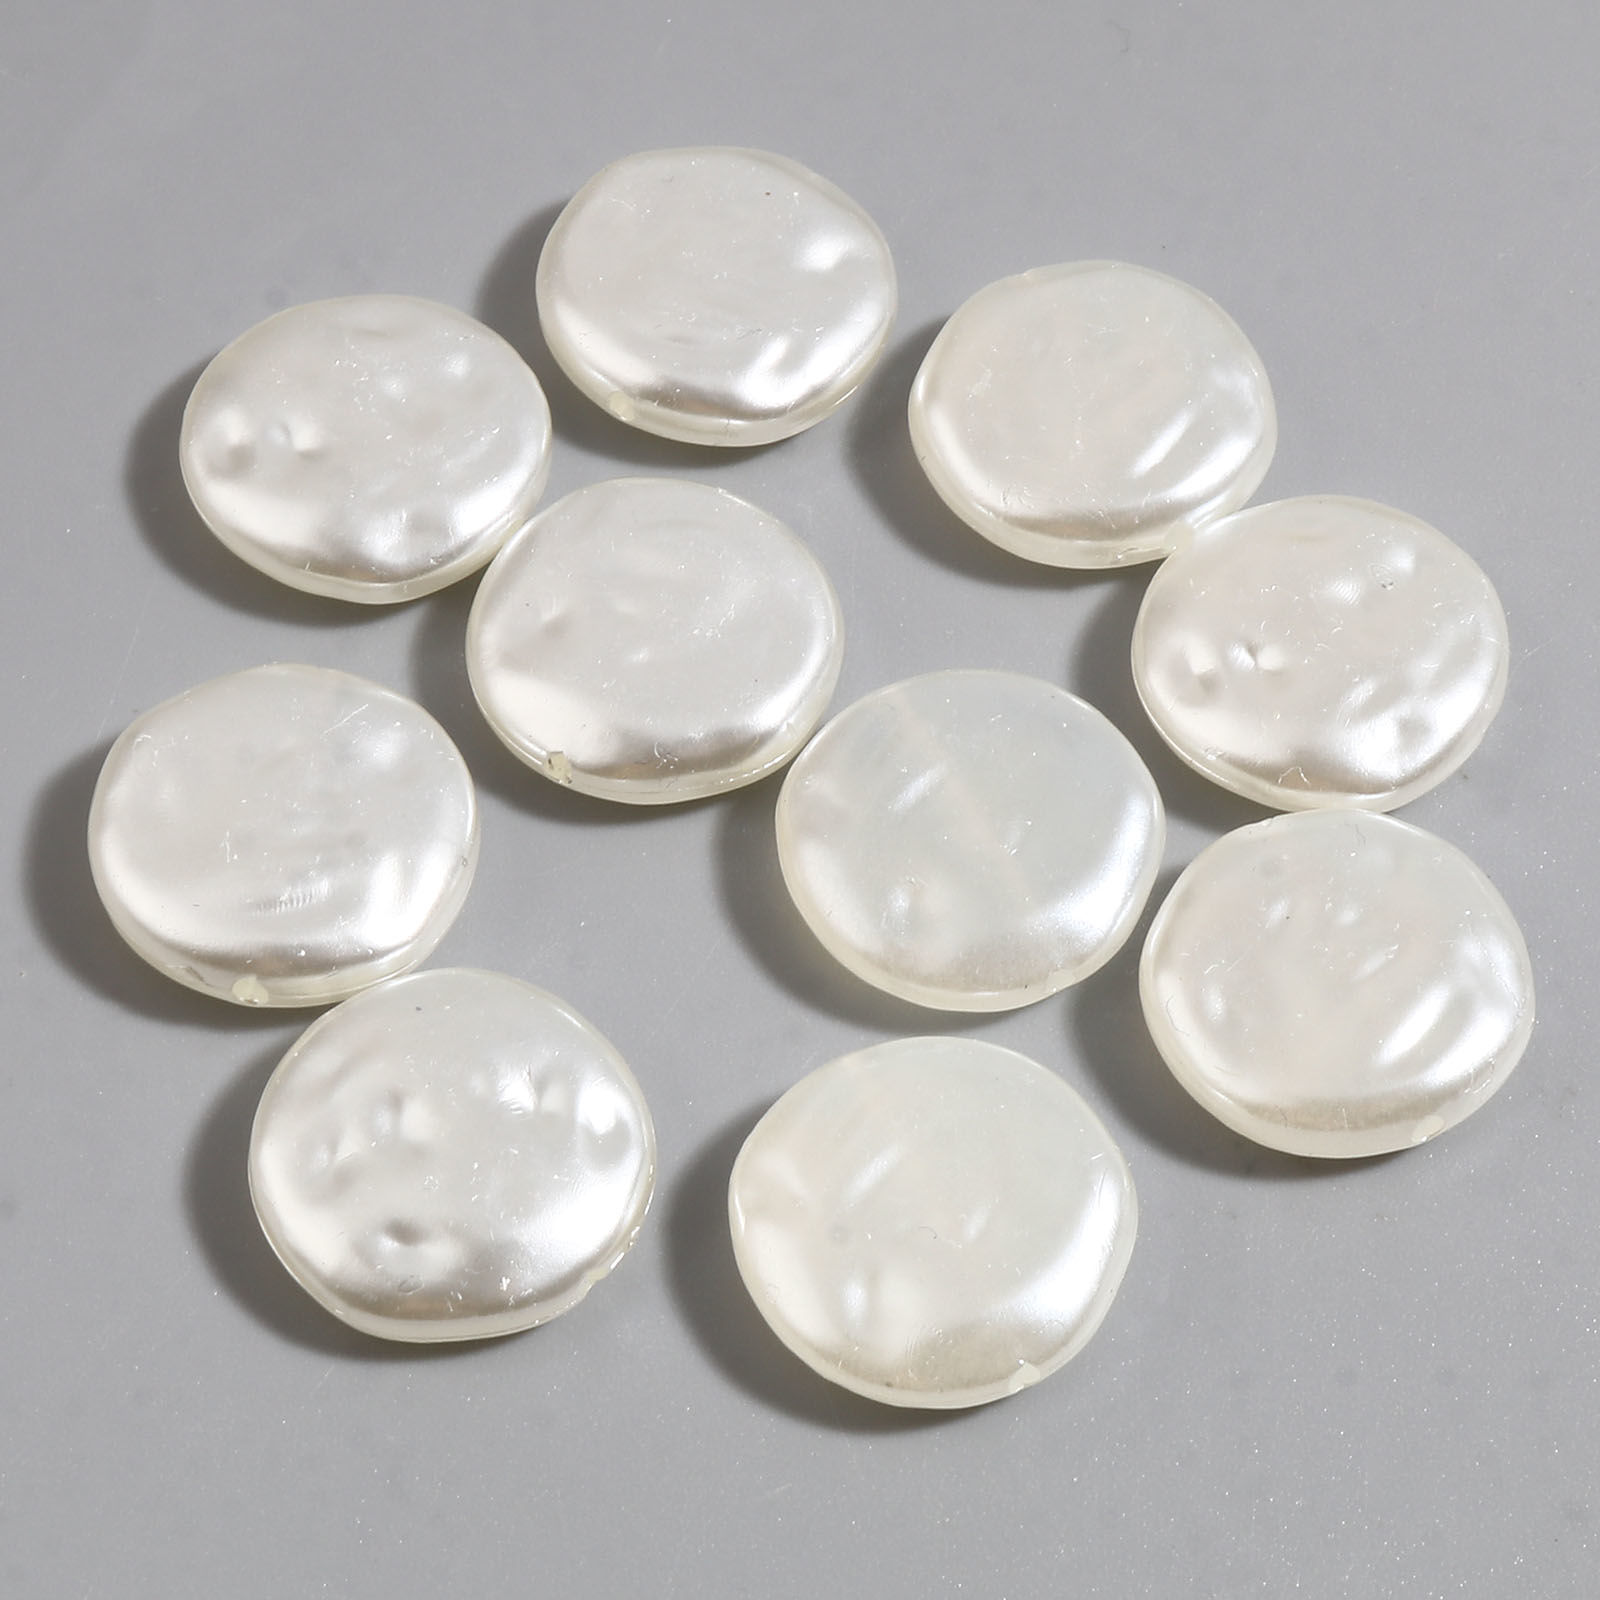 Picture of Acrylic Baroque Beads Irregular White Imitation Pearl About 18.5mm x 18mm, Hole: Approx 1.3mm, 50 PCs